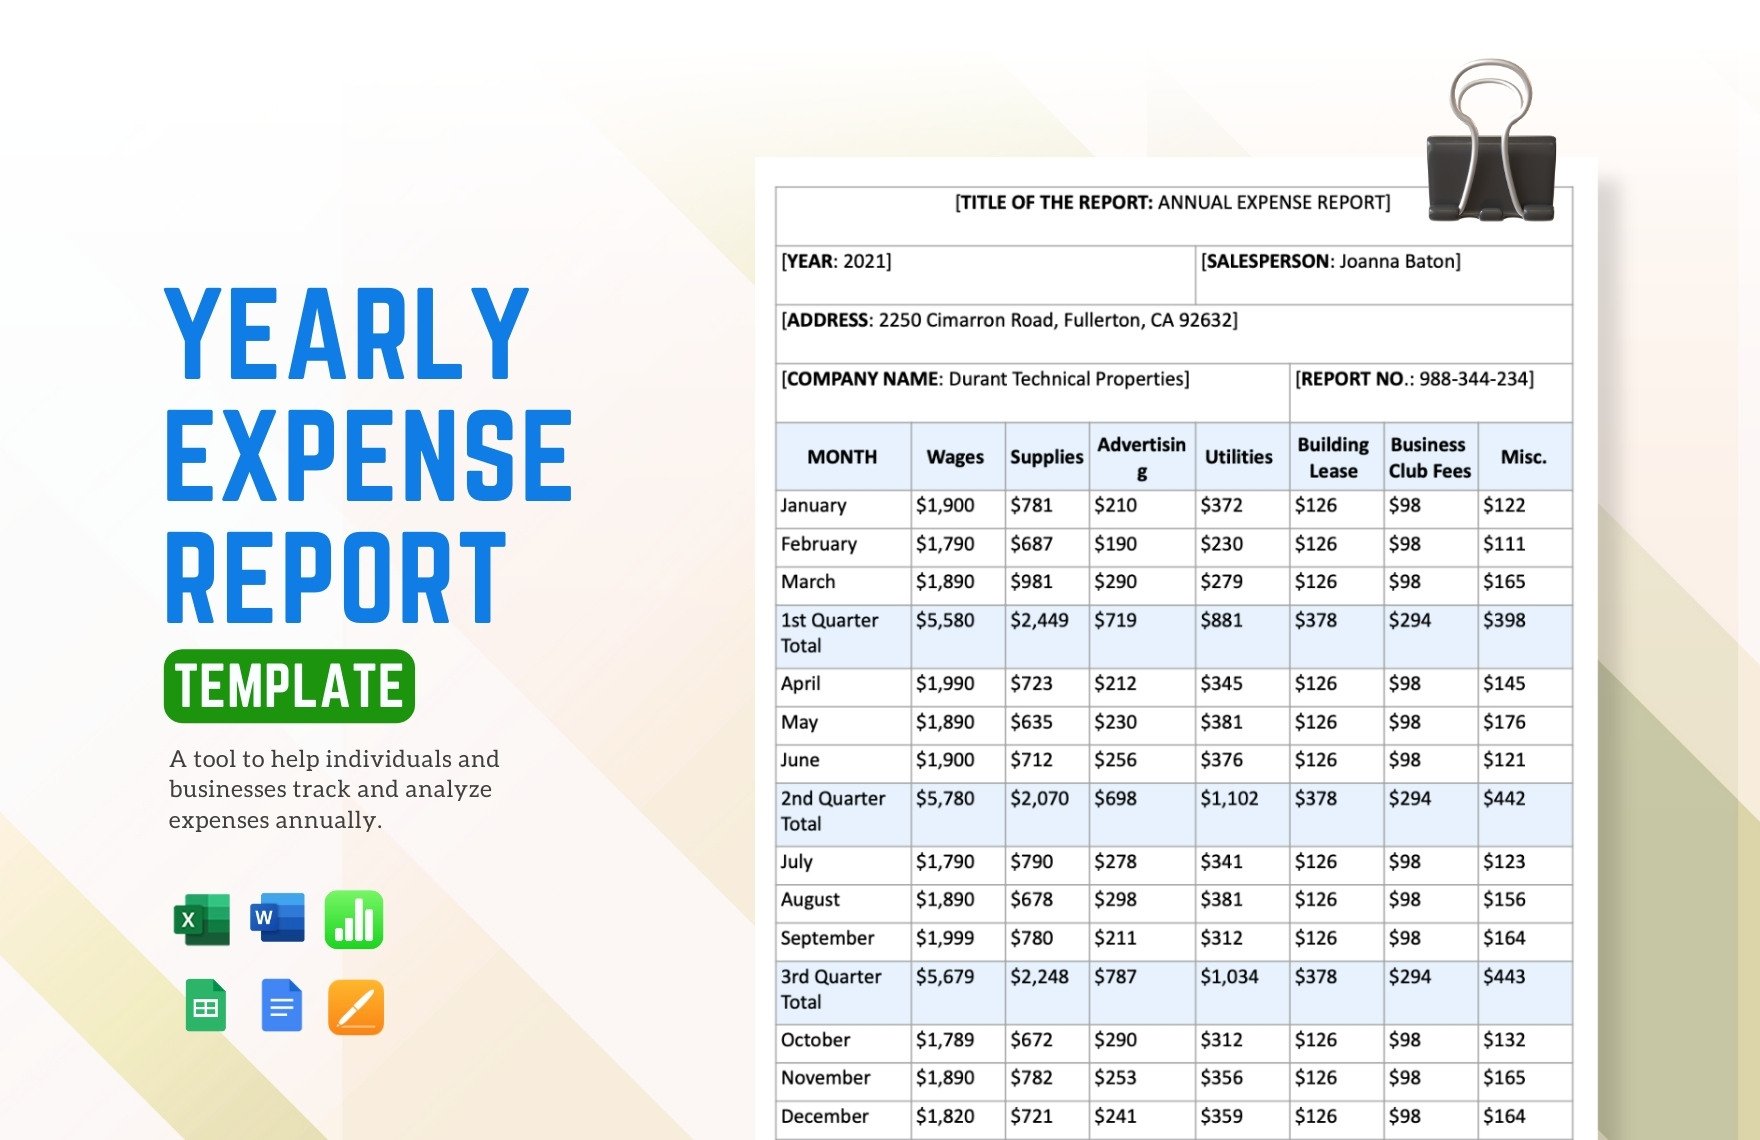 Free Yearly Expense Report Template in Word, Google Docs, Excel, Google Sheets, Apple Pages, Apple Numbers